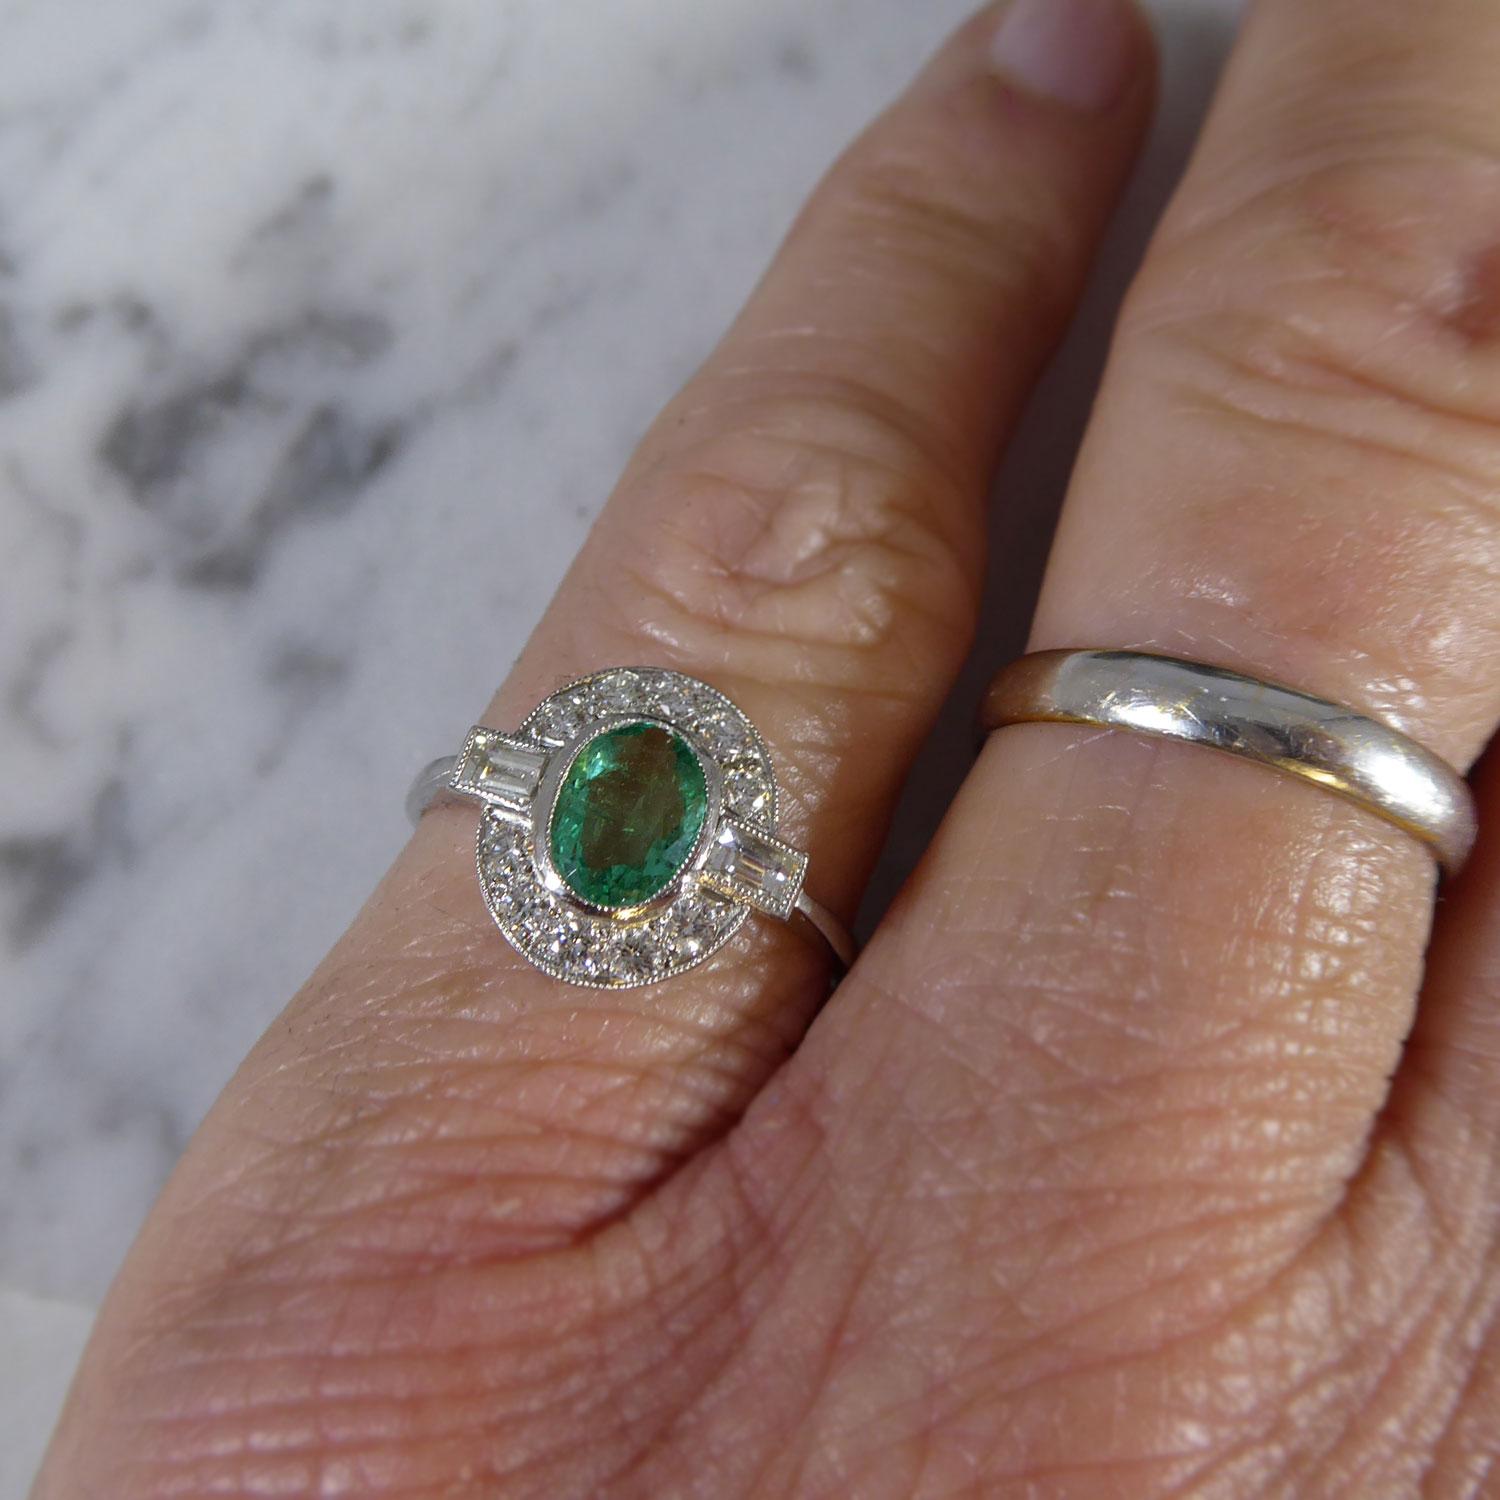 Women's Contemporary Art Deco Style Ring, Emerald and Diamond Cluster, Platinum Band